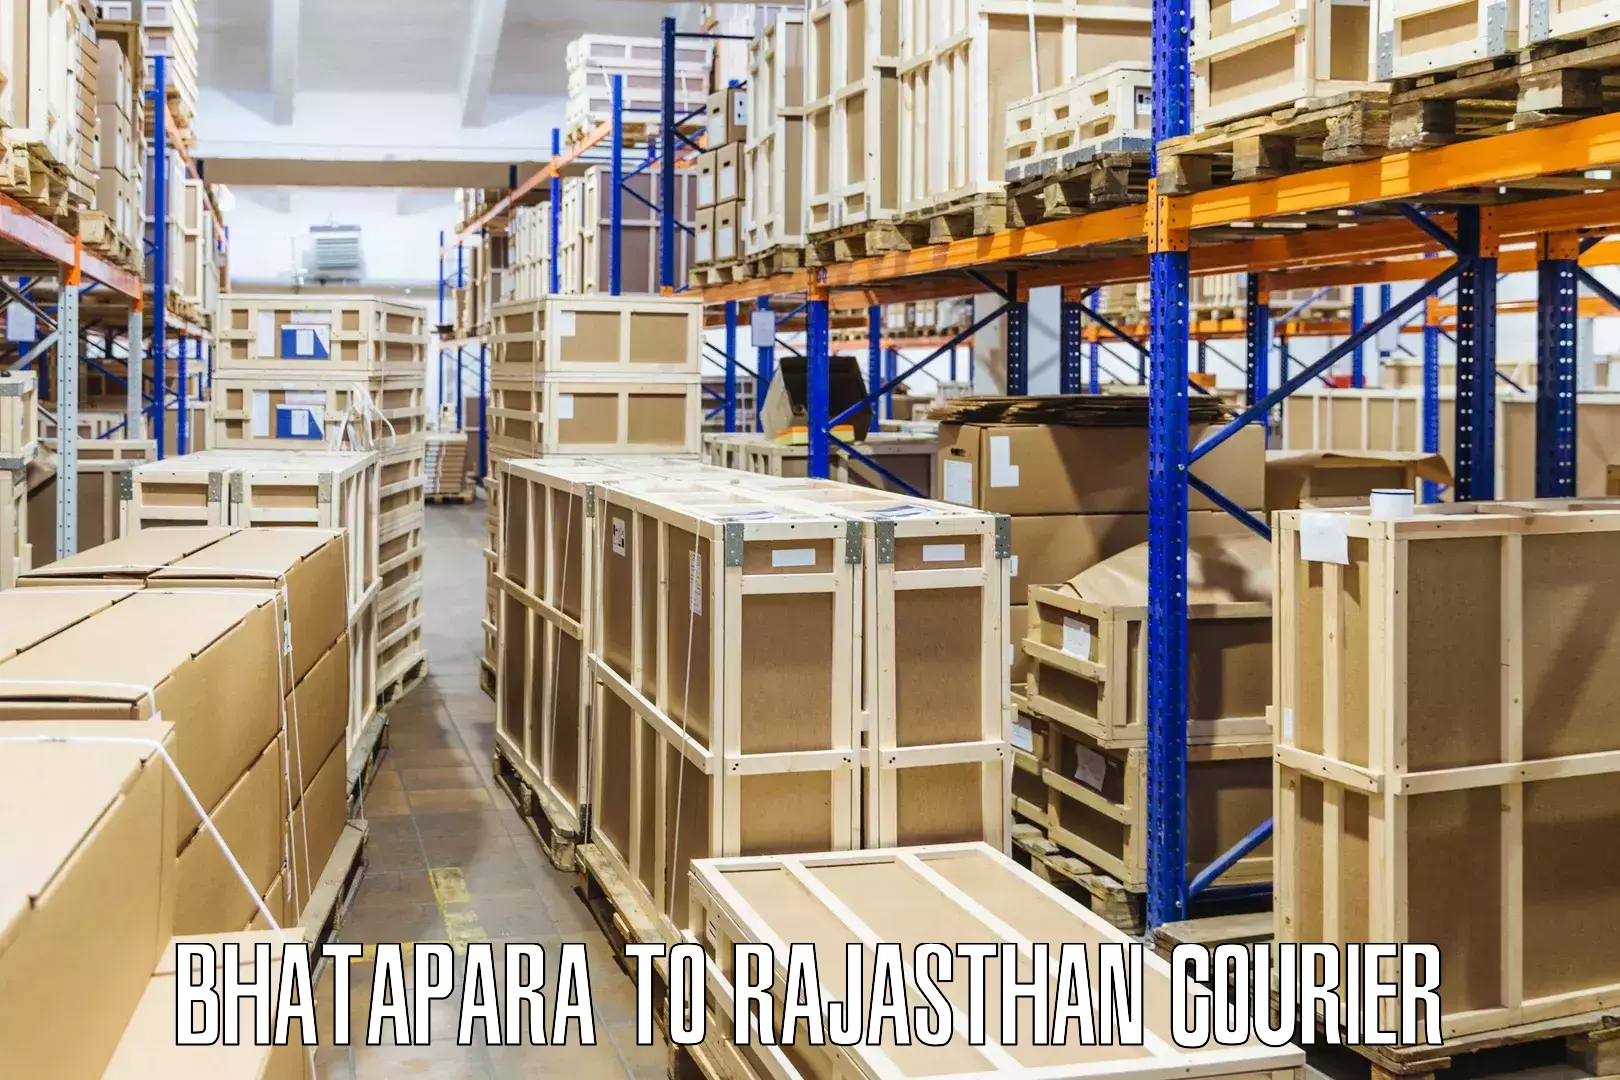 Reliable courier service Bhatapara to Suratgarh